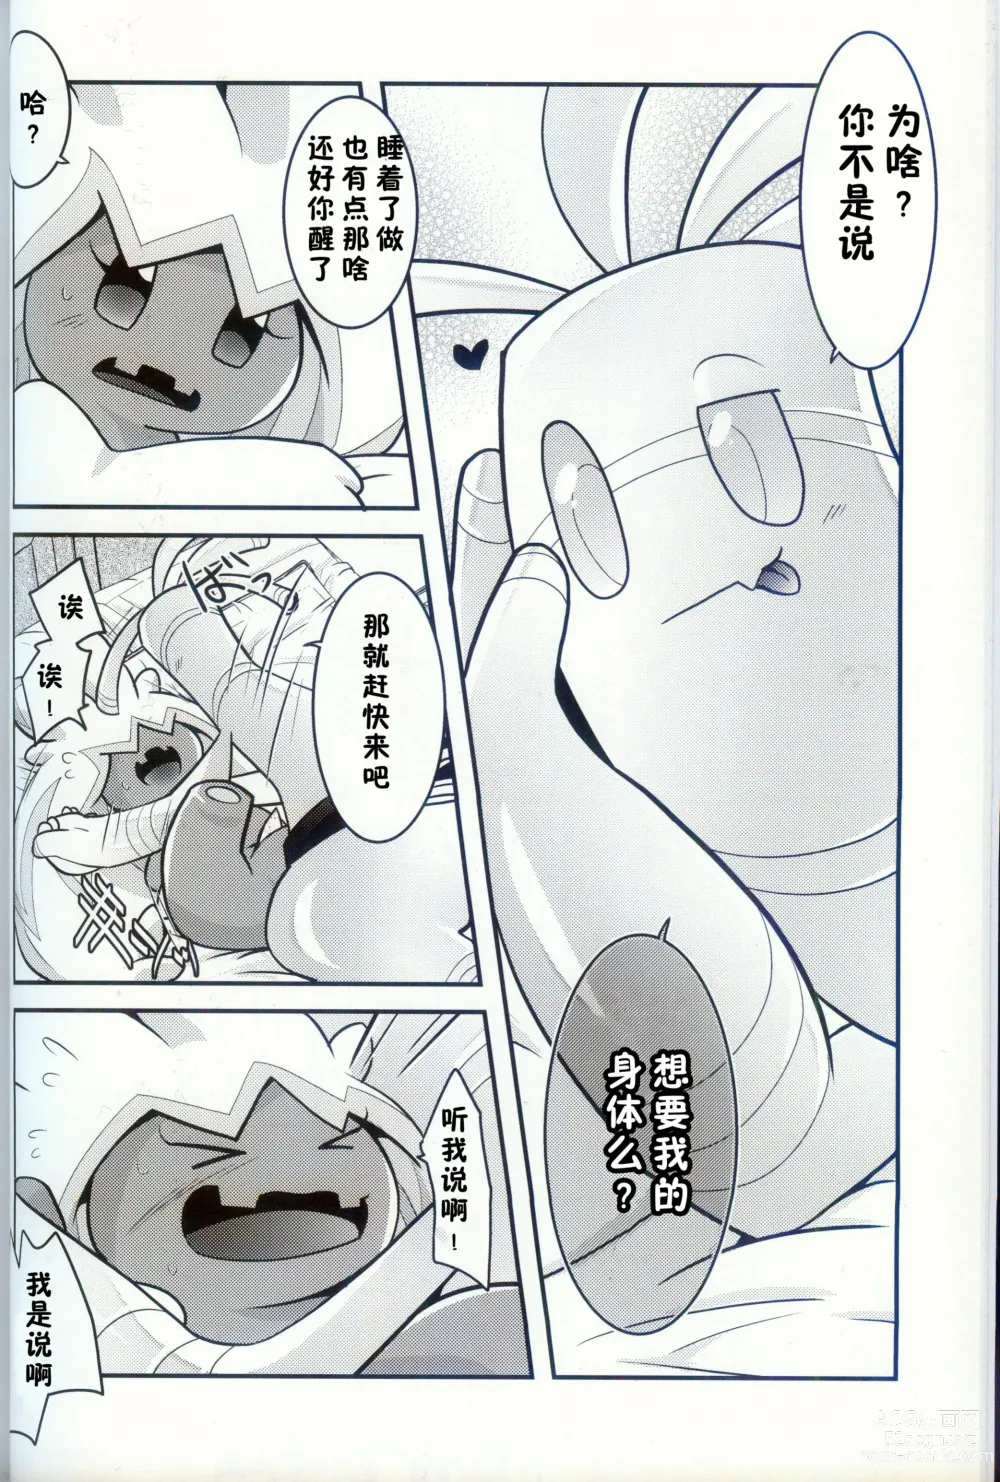 Page 13 of doujinshi 横滨的塞富豪巨锻匠